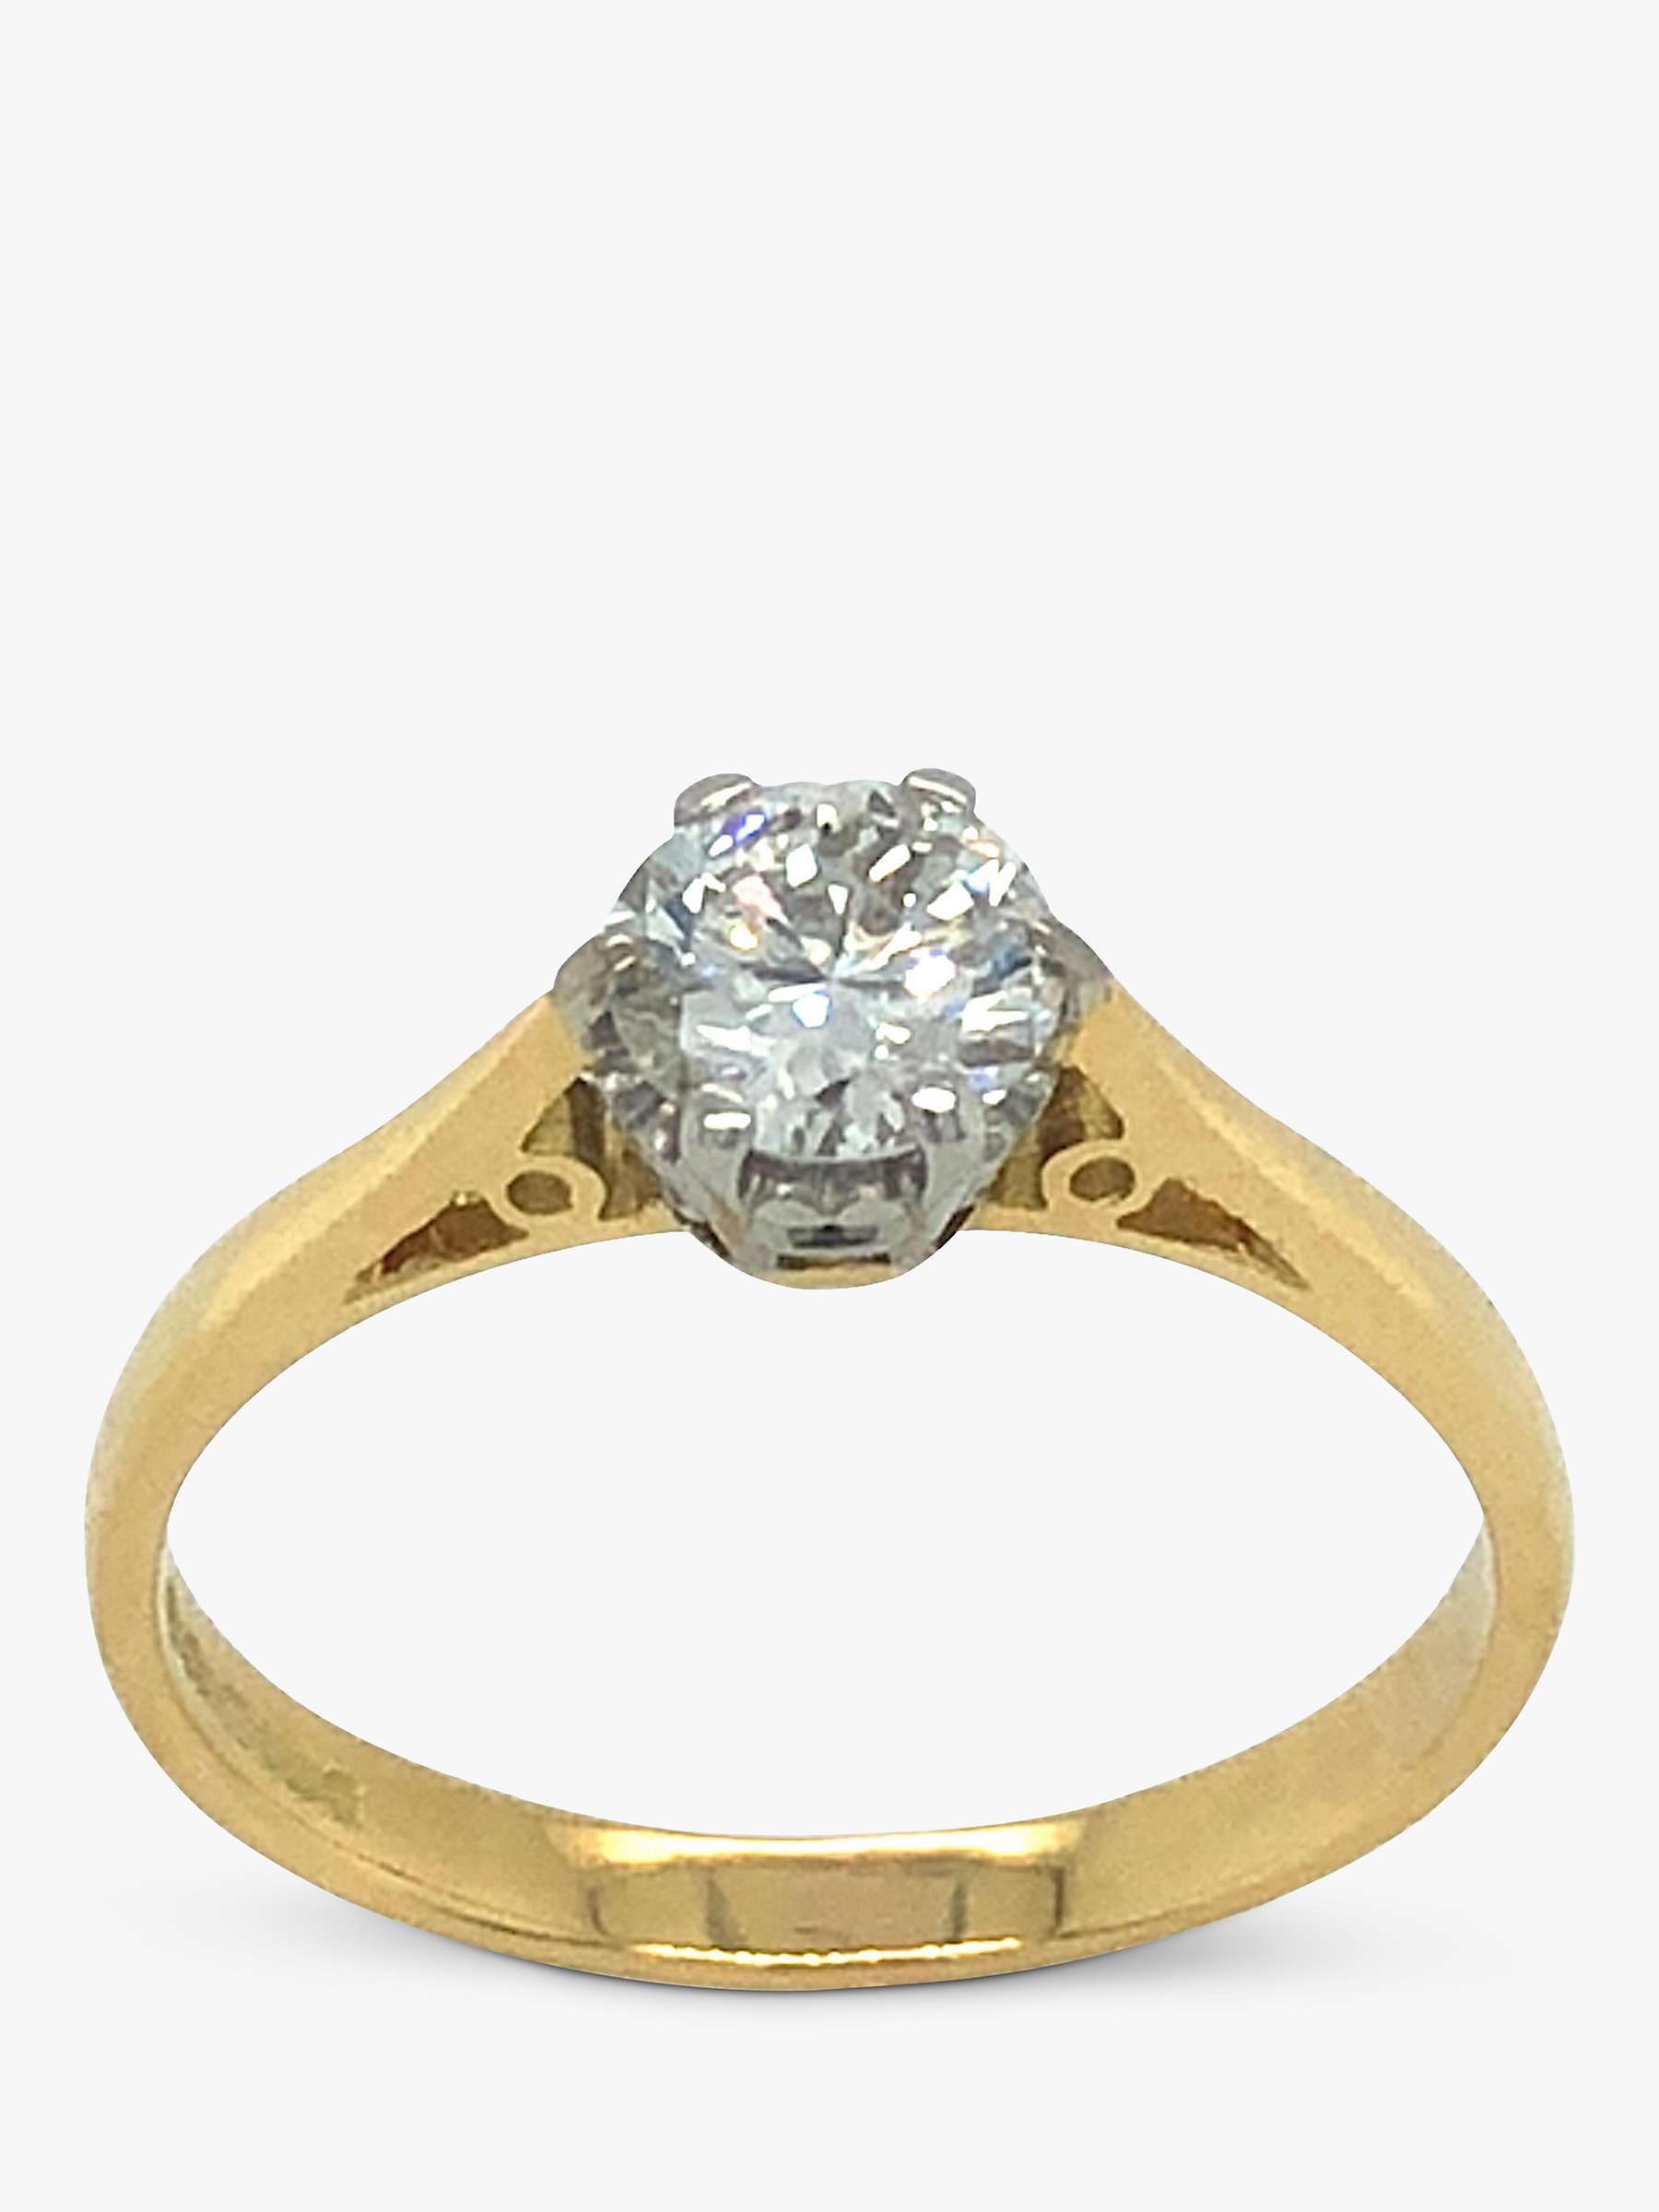 Buy Vintage Fine Jewellery Second Hand 18ct Yellow & White Gold Solitaire Diamond Ring, Gold Online at johnlewis.com